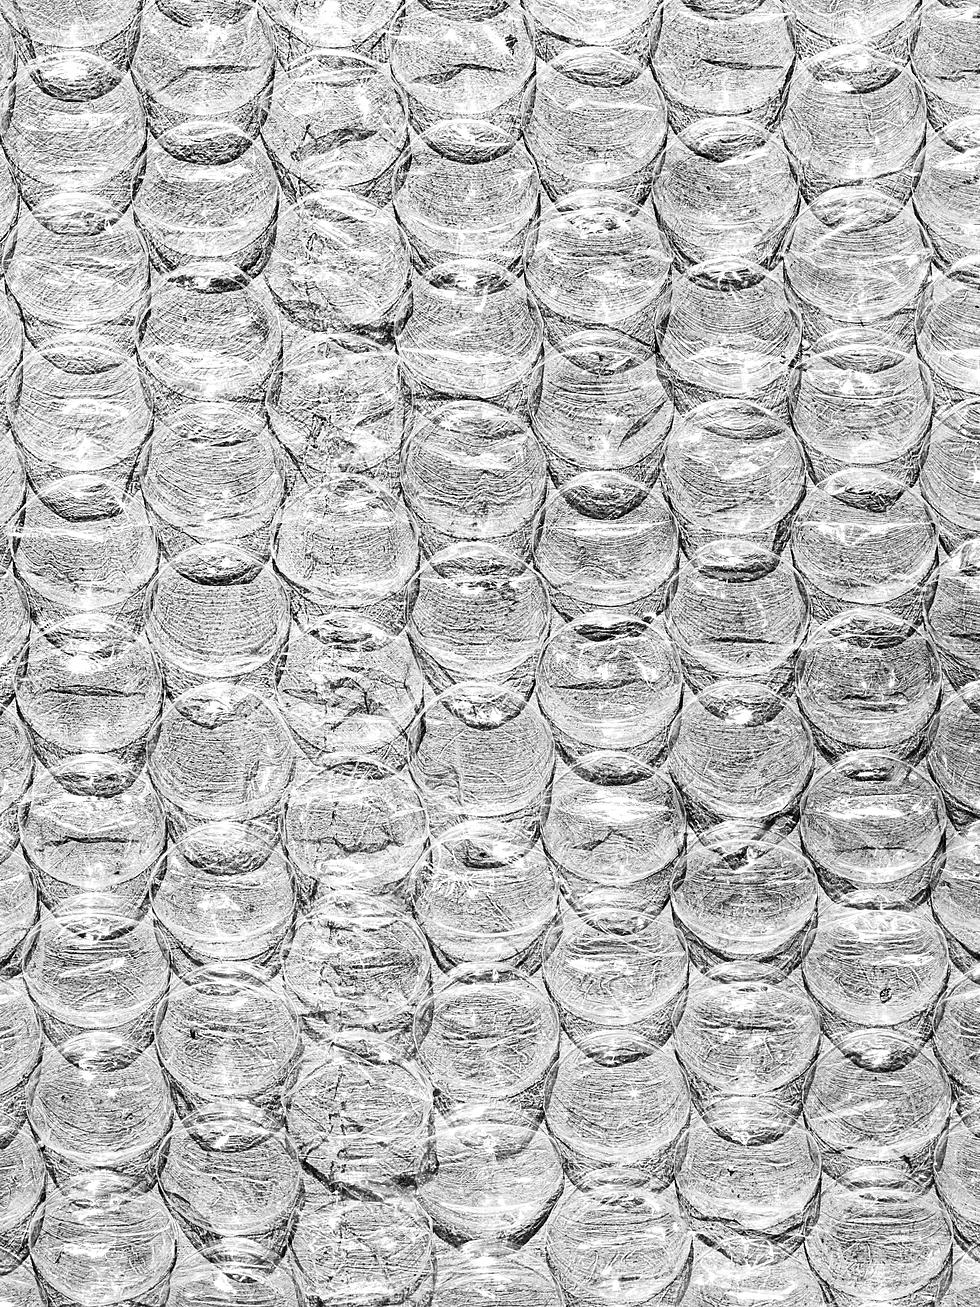 What Does IBM Have To Do With Bubble Wrap? More Than You Think